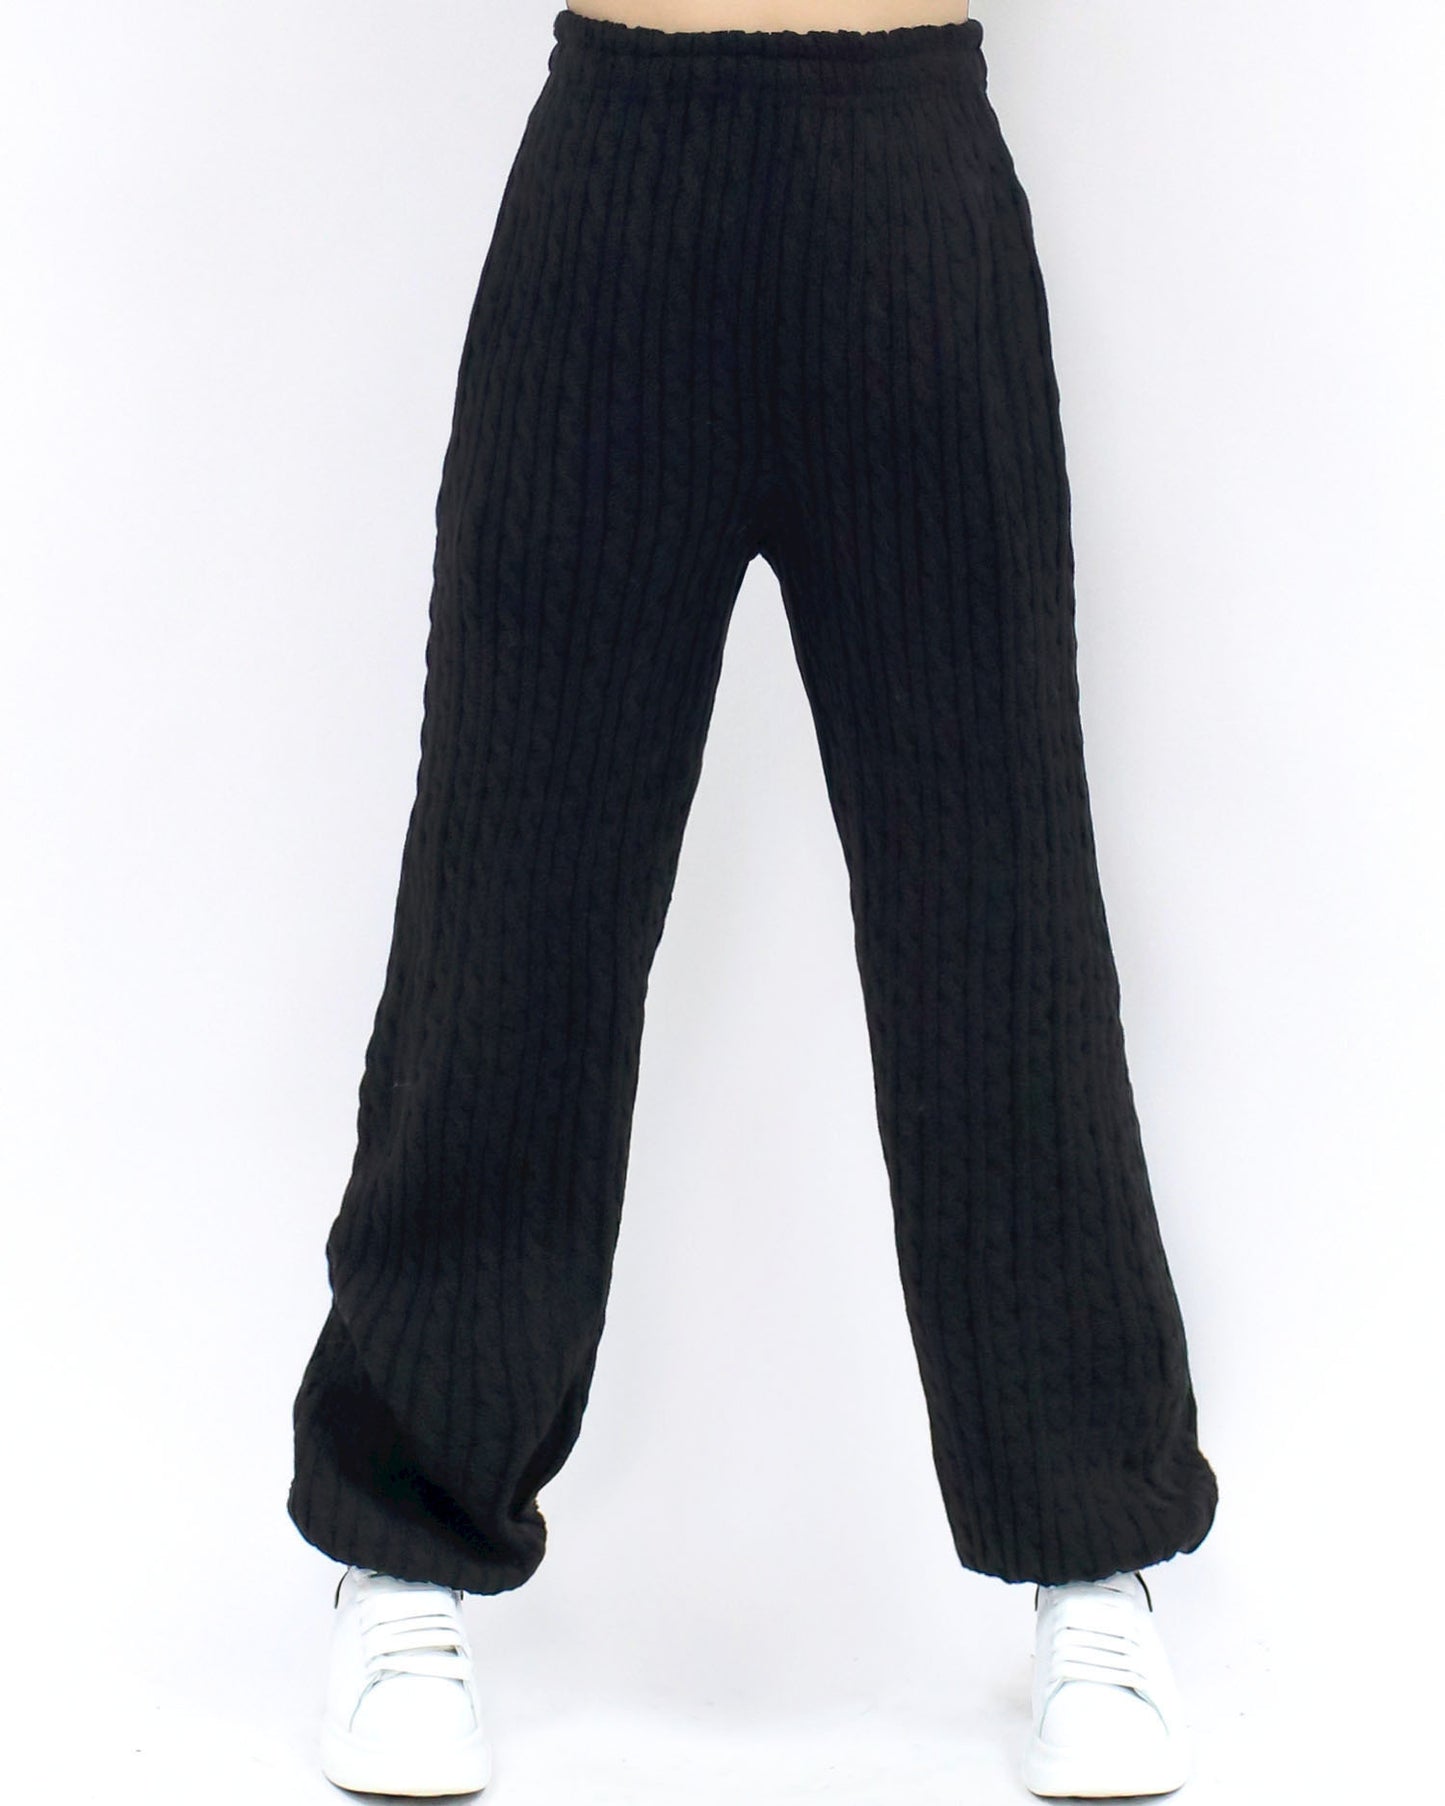 black twisted knitted jogger pants